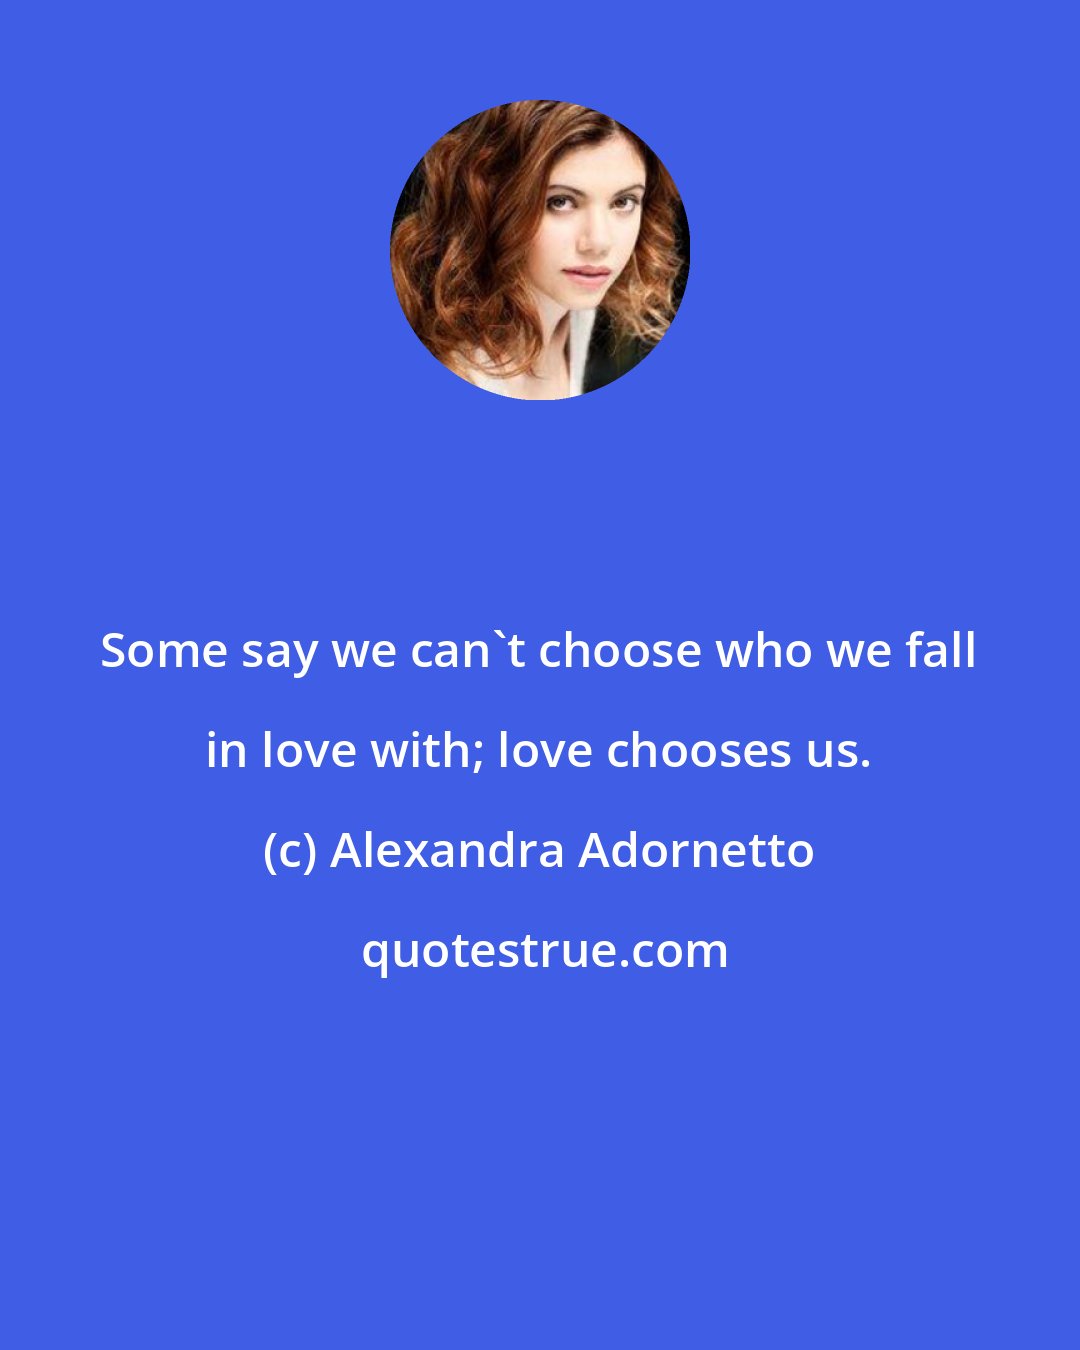 Alexandra Adornetto: Some say we can't choose who we fall in love with; love chooses us.